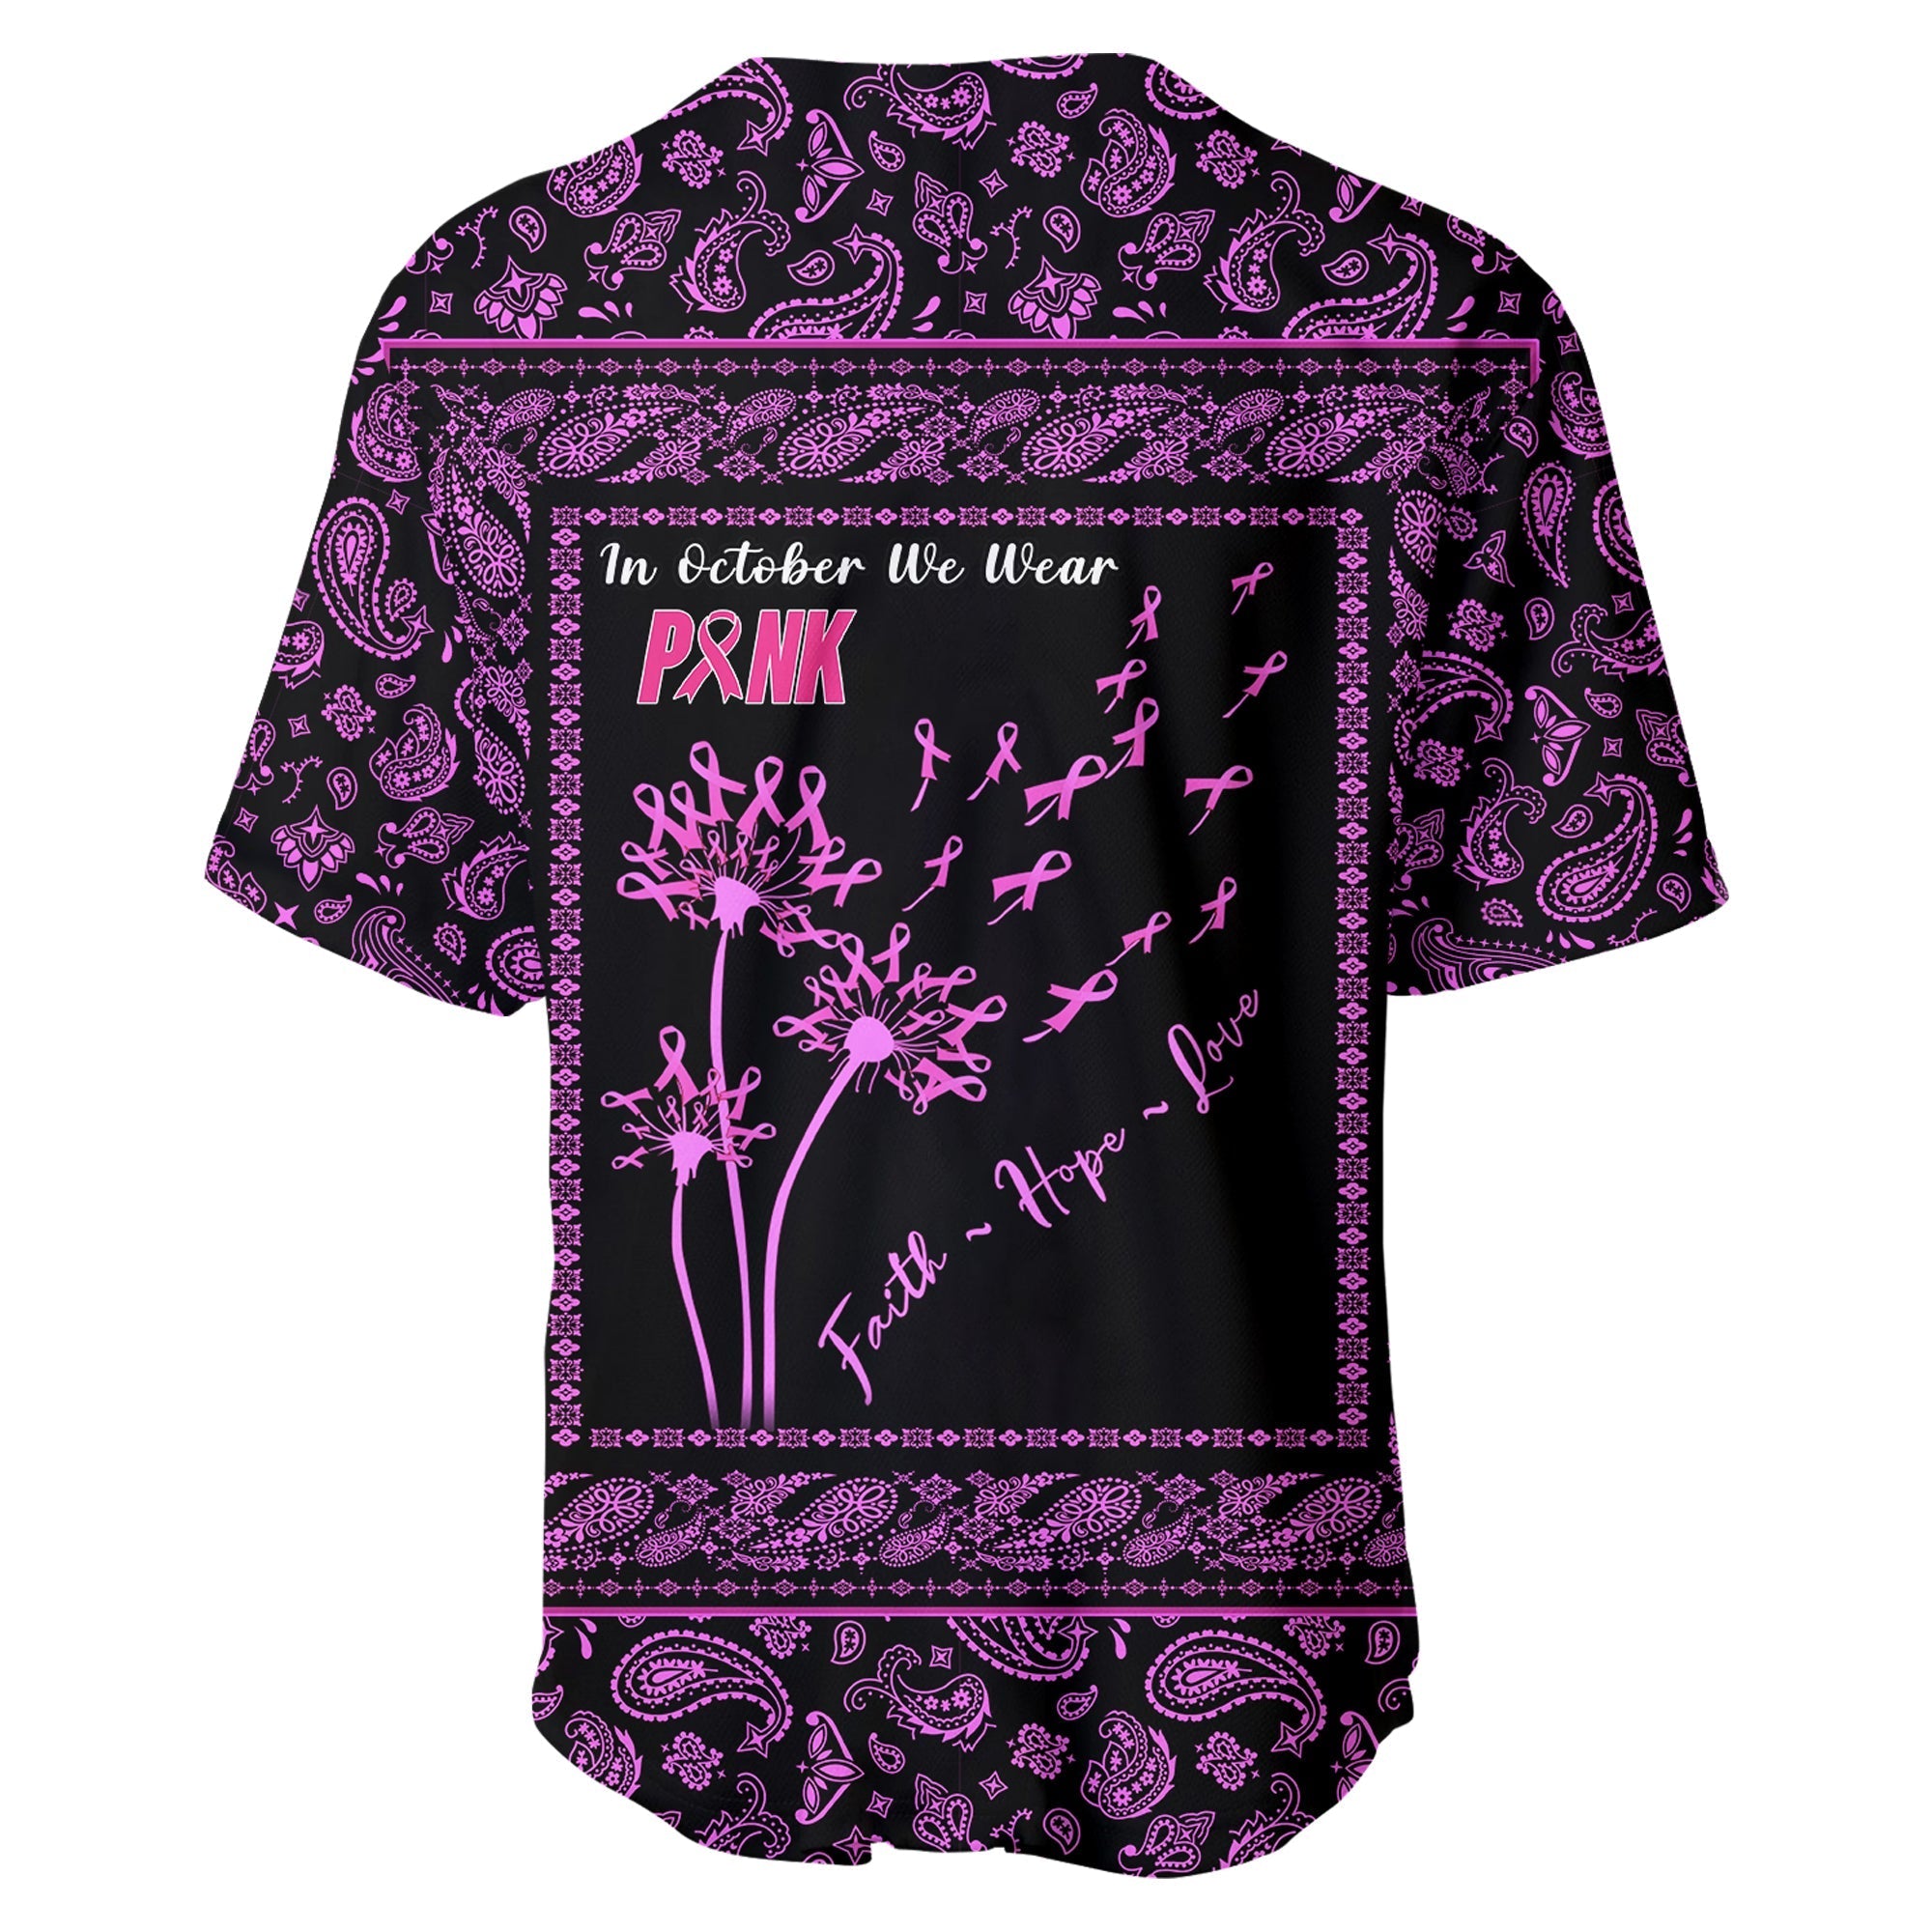 custom-personalised-breast-cancer-baseball-jersey-black-paisley-pattern-in-october-we-wear-pink